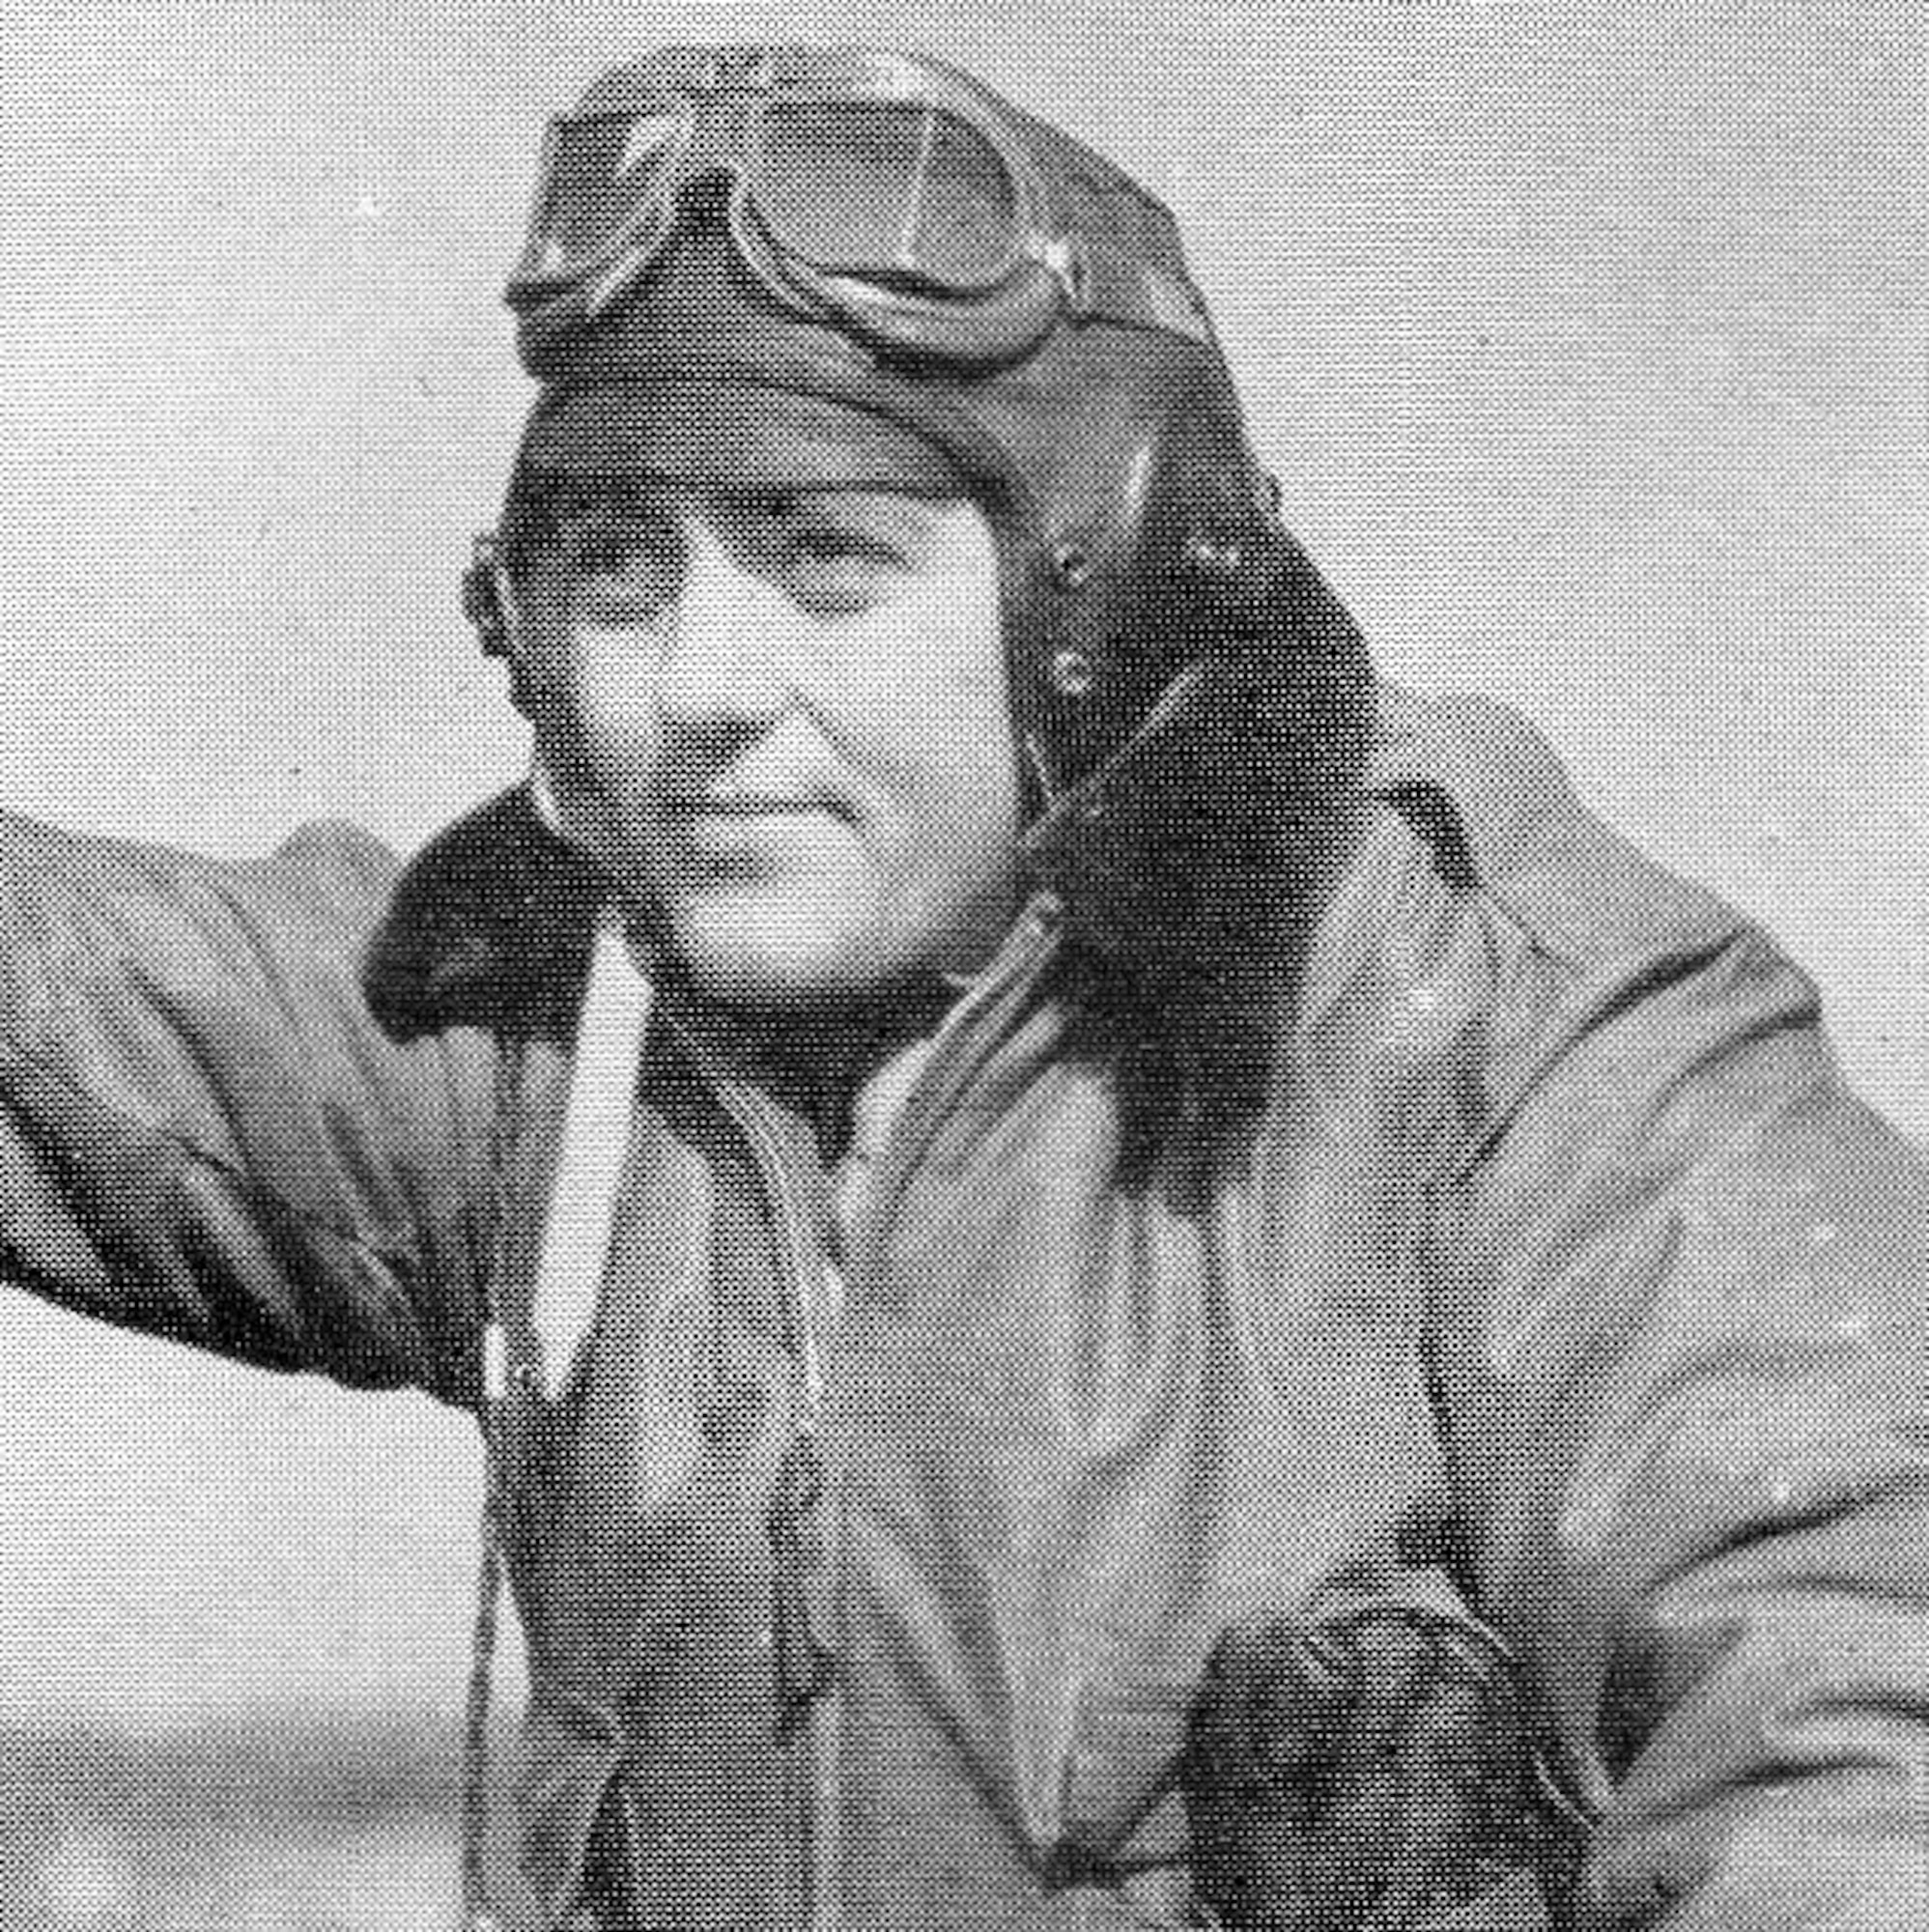 F/O Edwin S. Humphreys, 404th Fighter Squadron, struck a pose for the camera in his flying gear in this undated photograph.  He went MIA on 8 June 1944